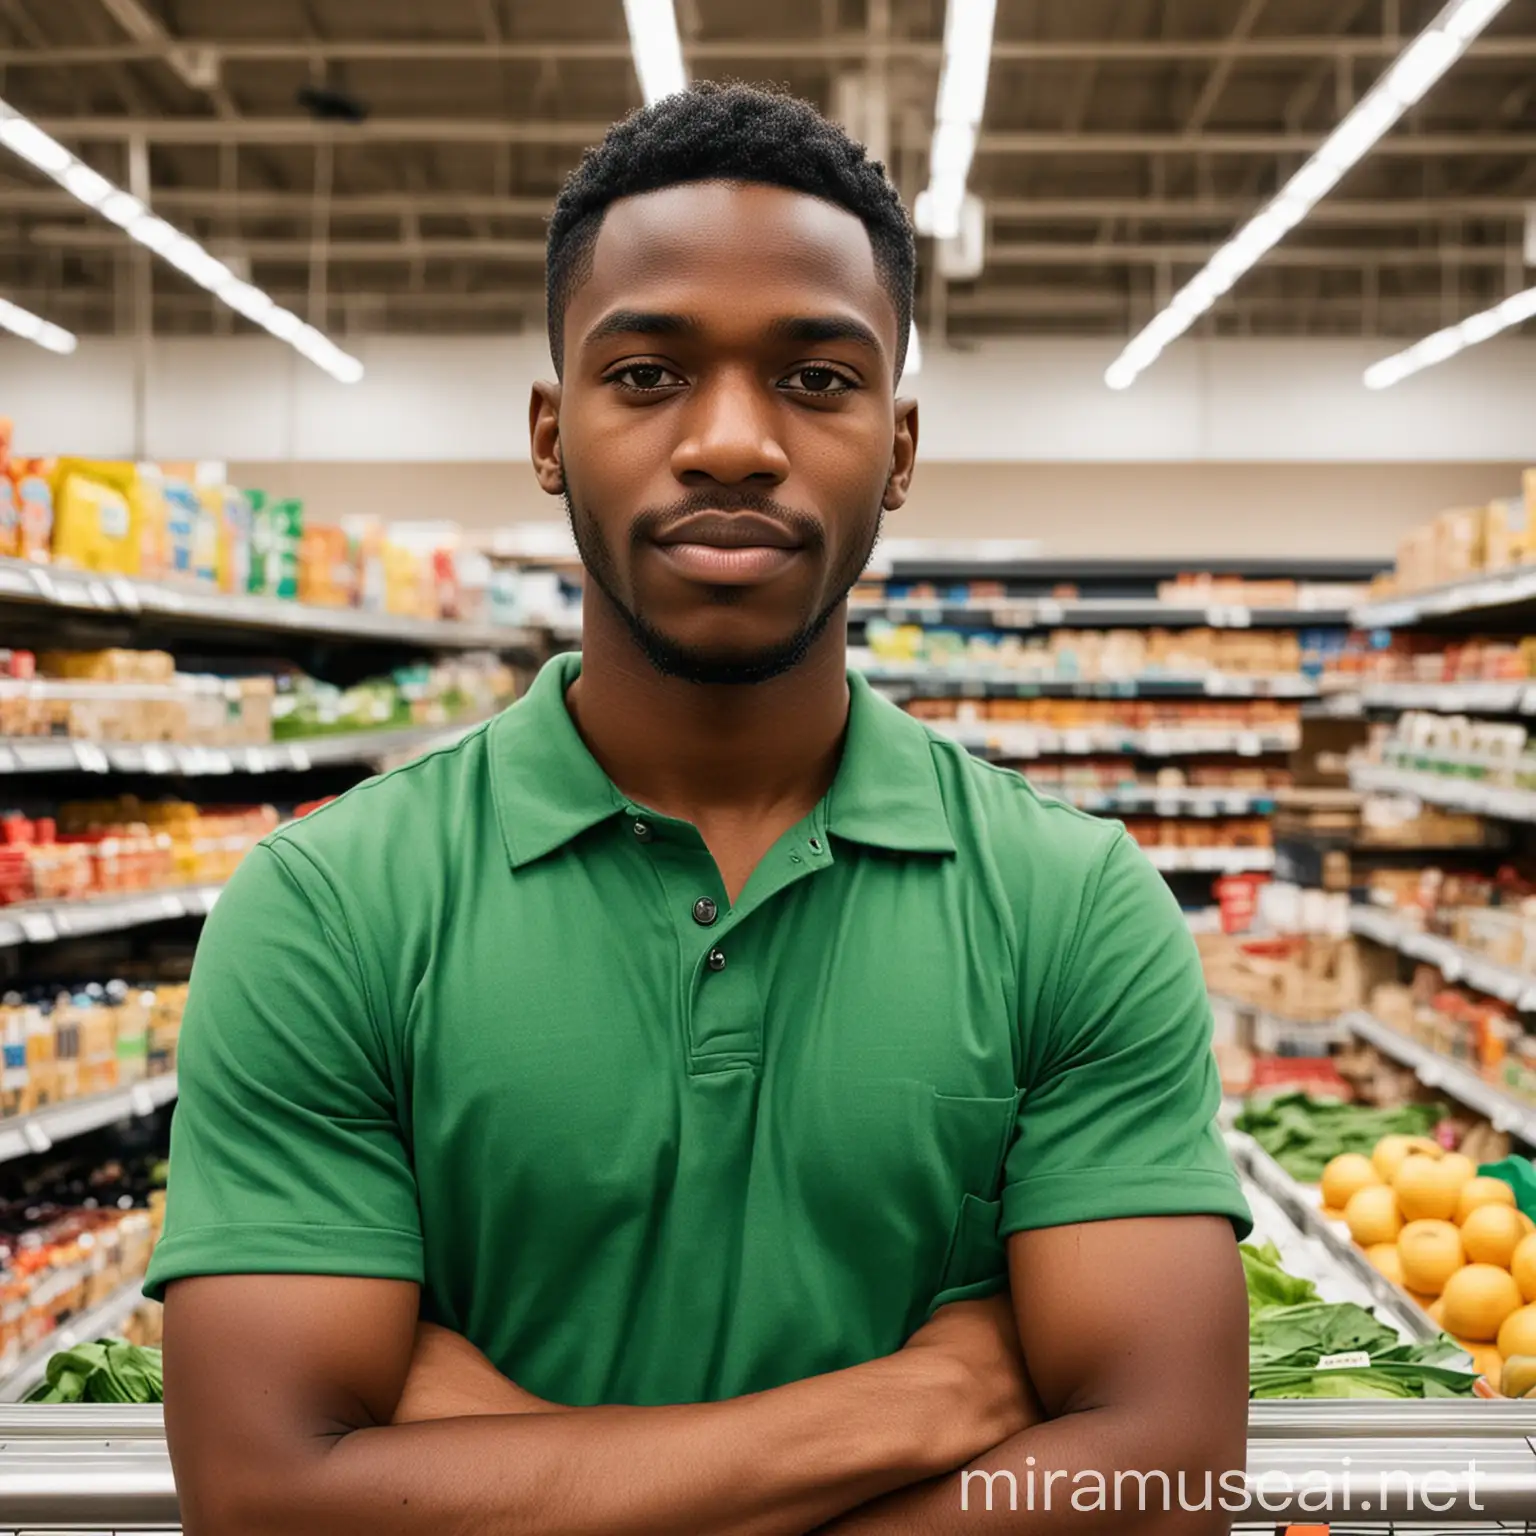 Confident Black Male Worker with Crossed Arms in Supermarket Wearing Green Shirt